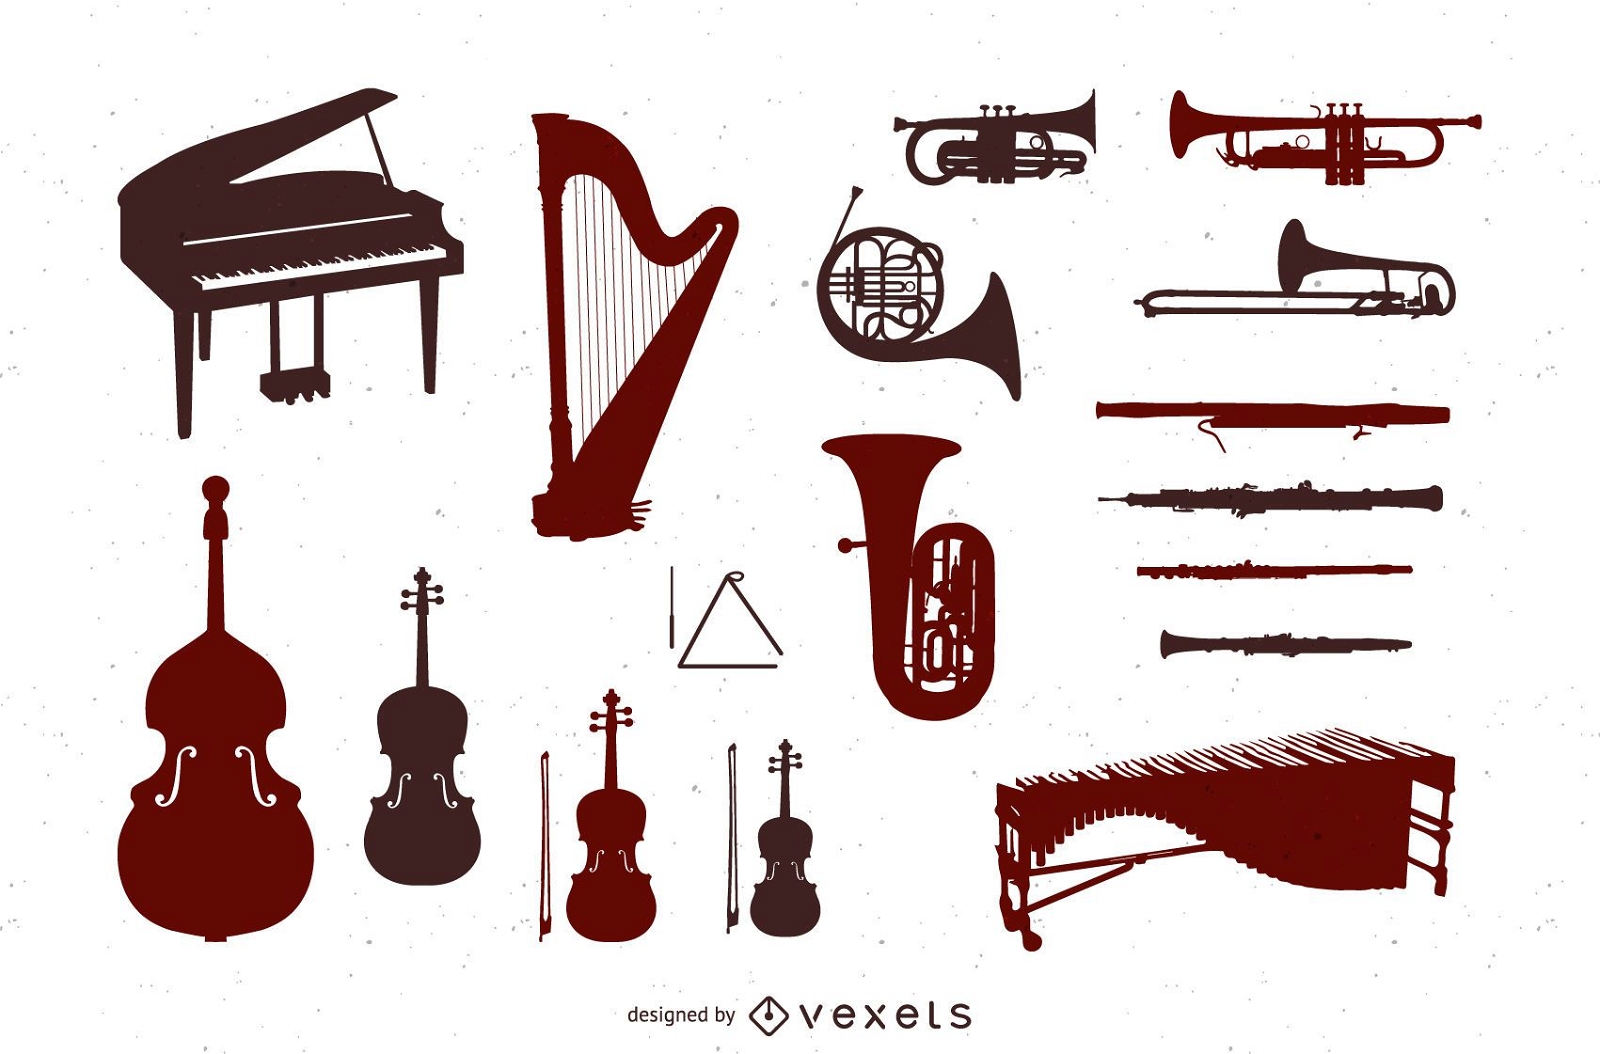 Orchestra instruments silhouette set